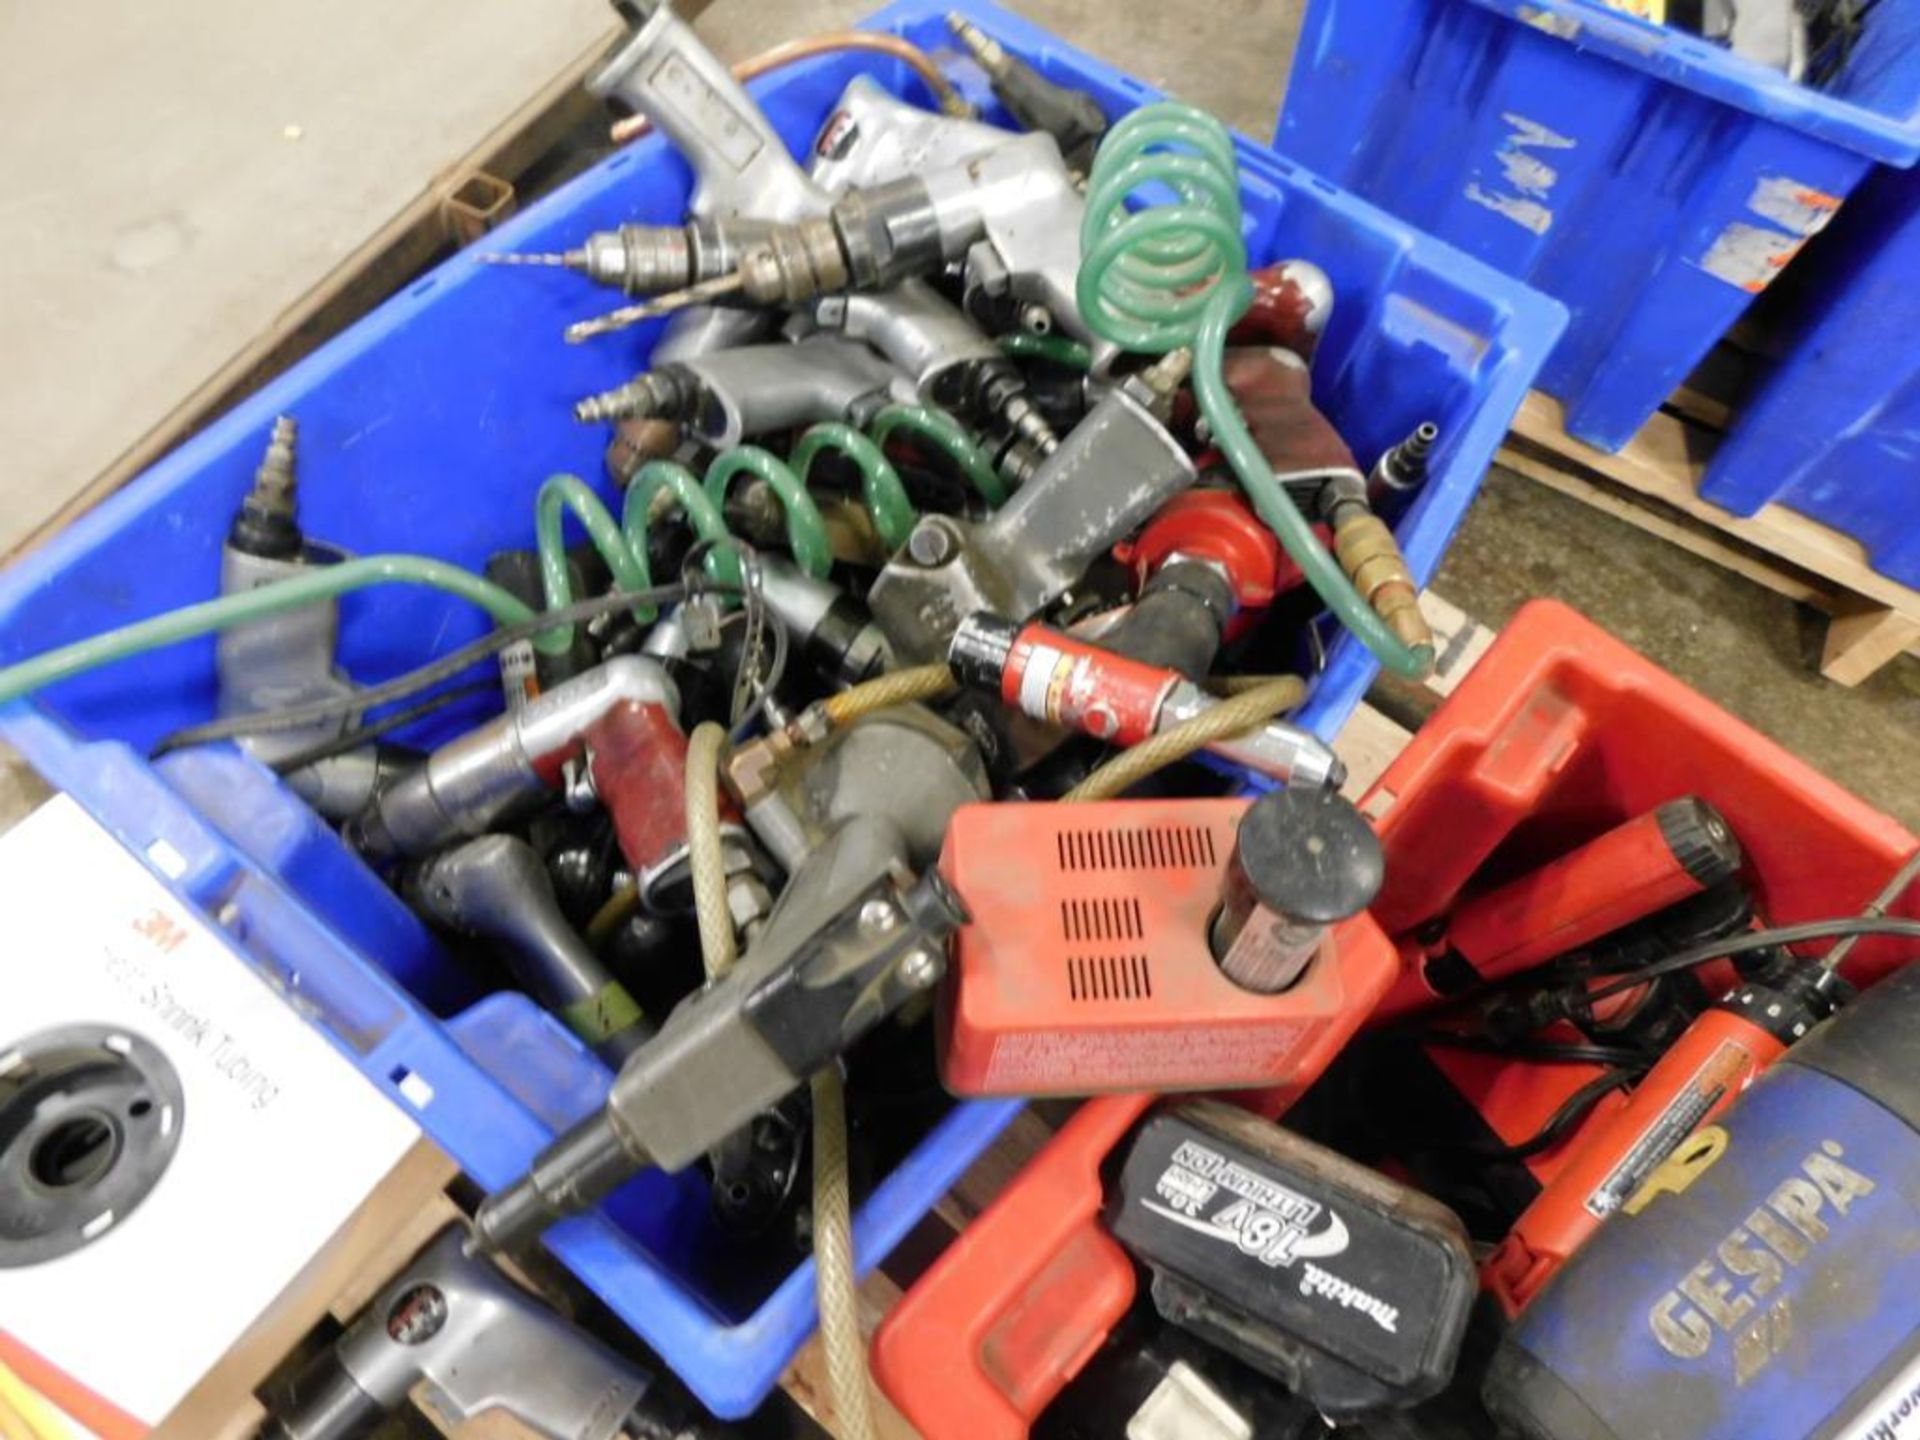 LOT CONSISTING OF: pneu. tools, cordless tools, assorted (lg. qty. on pallet) - Image 3 of 3